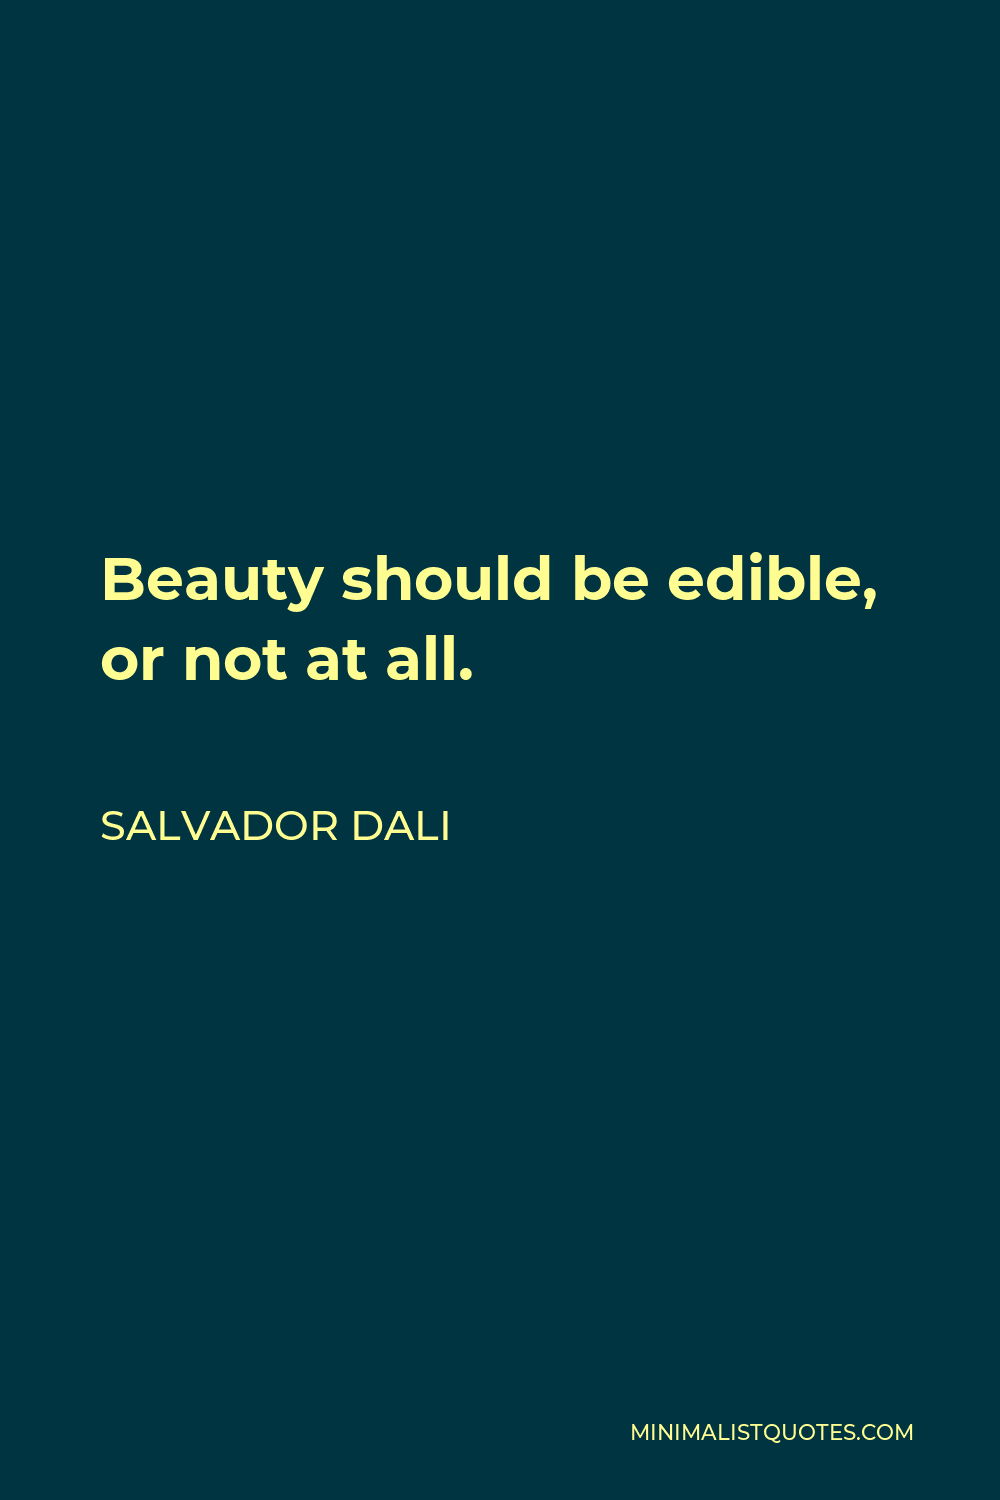 Salvador Dali Quote - Beauty should be edible, or not at all.